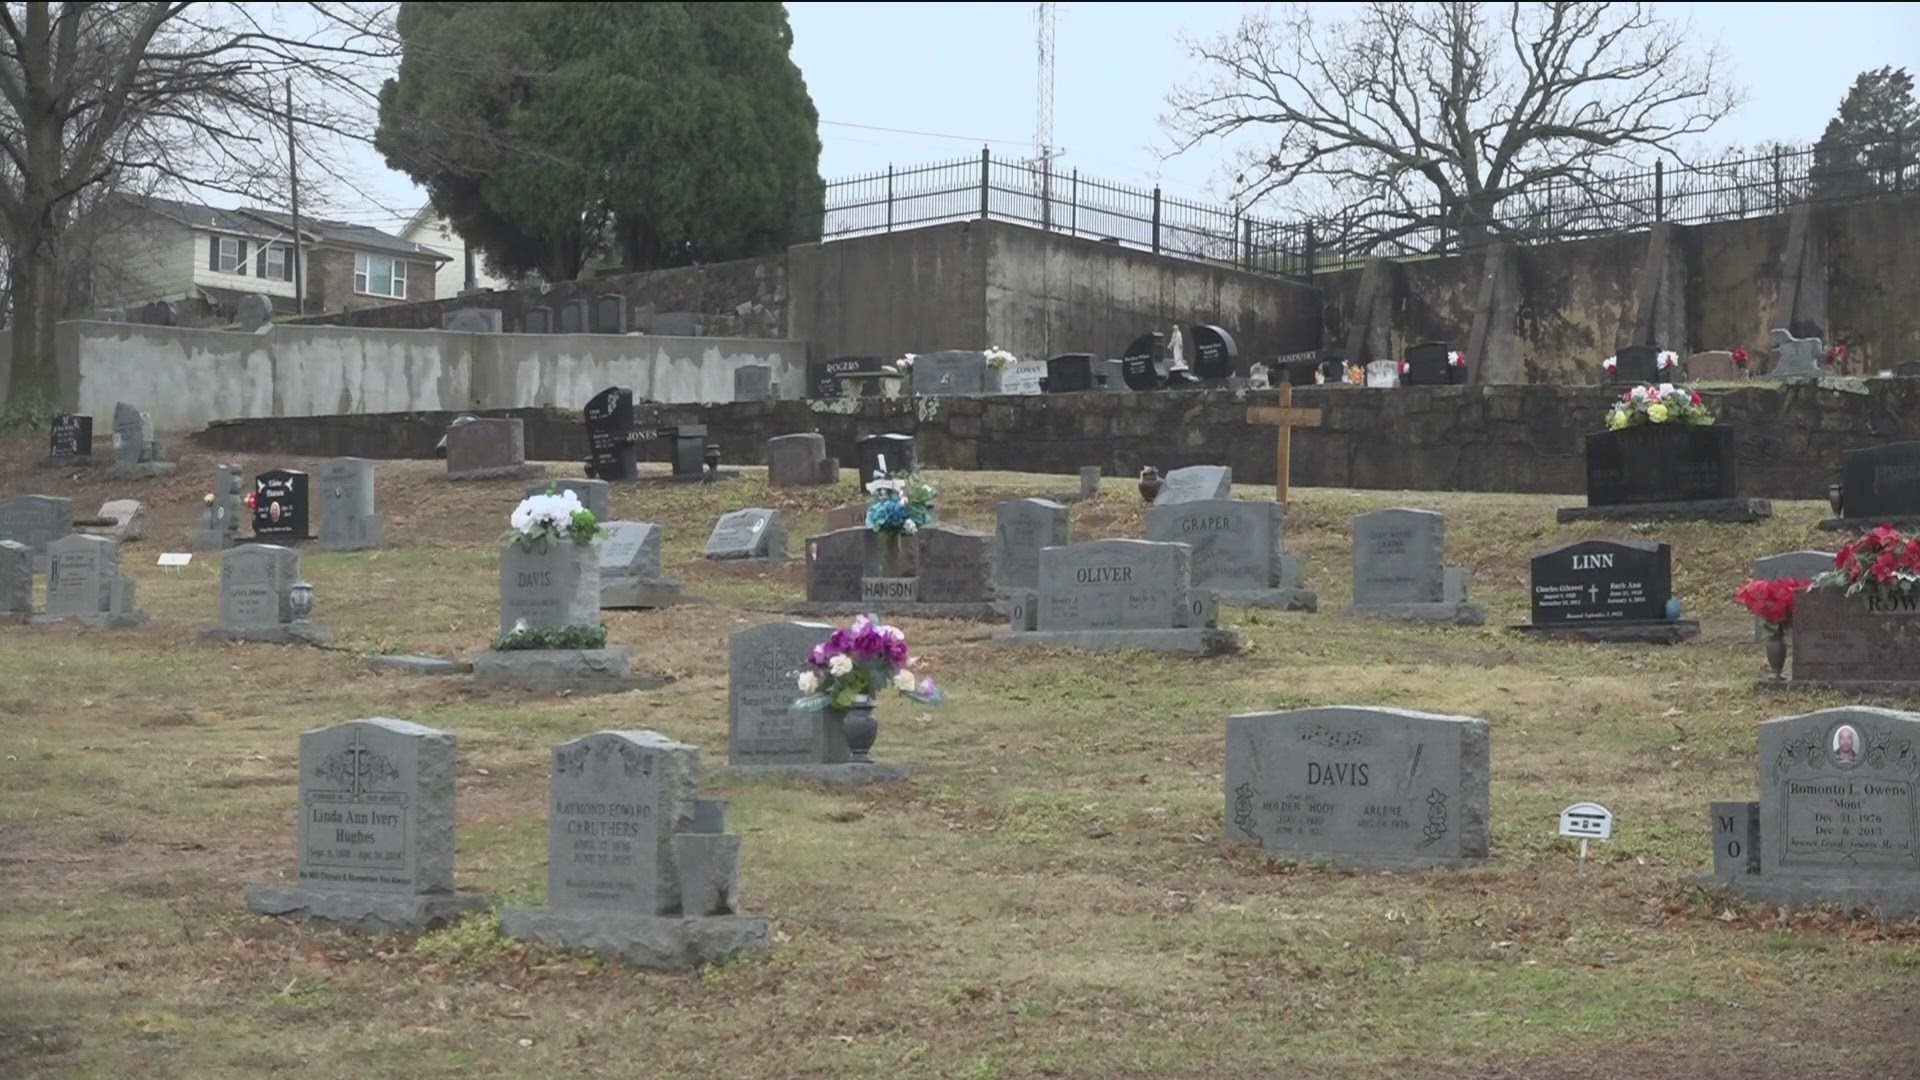 In February, Oak Cemetery was mandated by the For Smith Parks and Recreation Department to remove all decorations and items around gravesites.